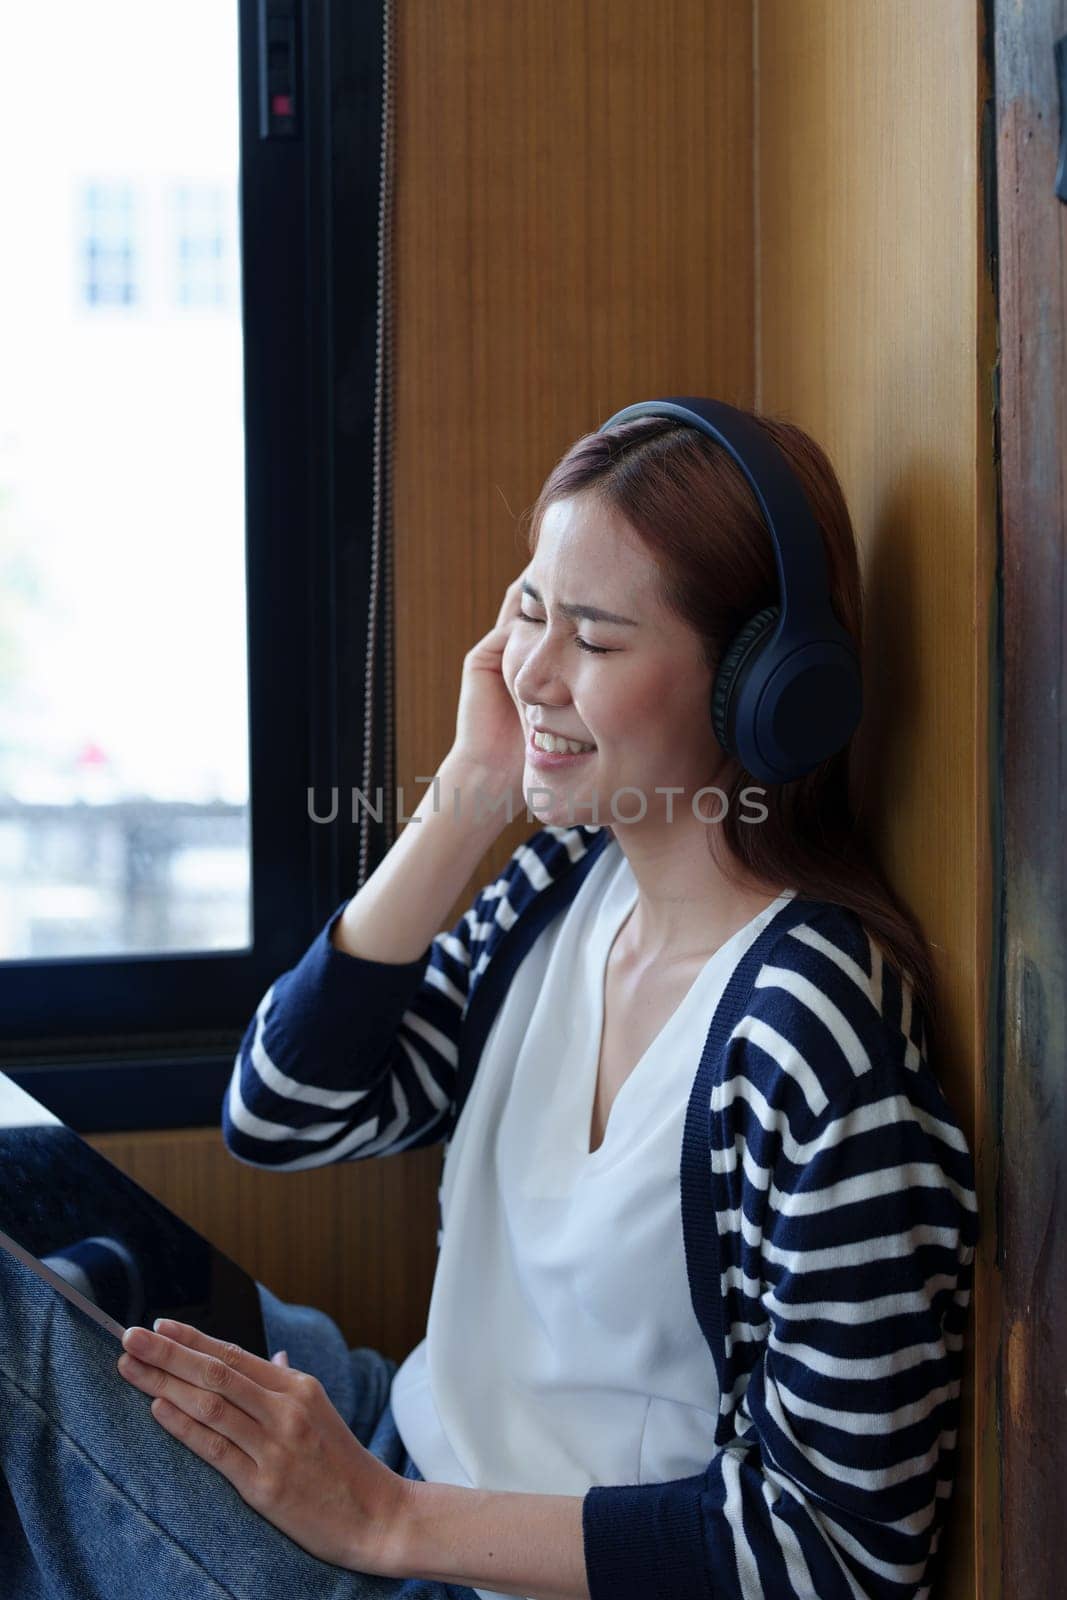 A portrait of a young Asian woman with a smiling face using a tablet computer and wearing headphones over her ears is sitting happily relaxing.